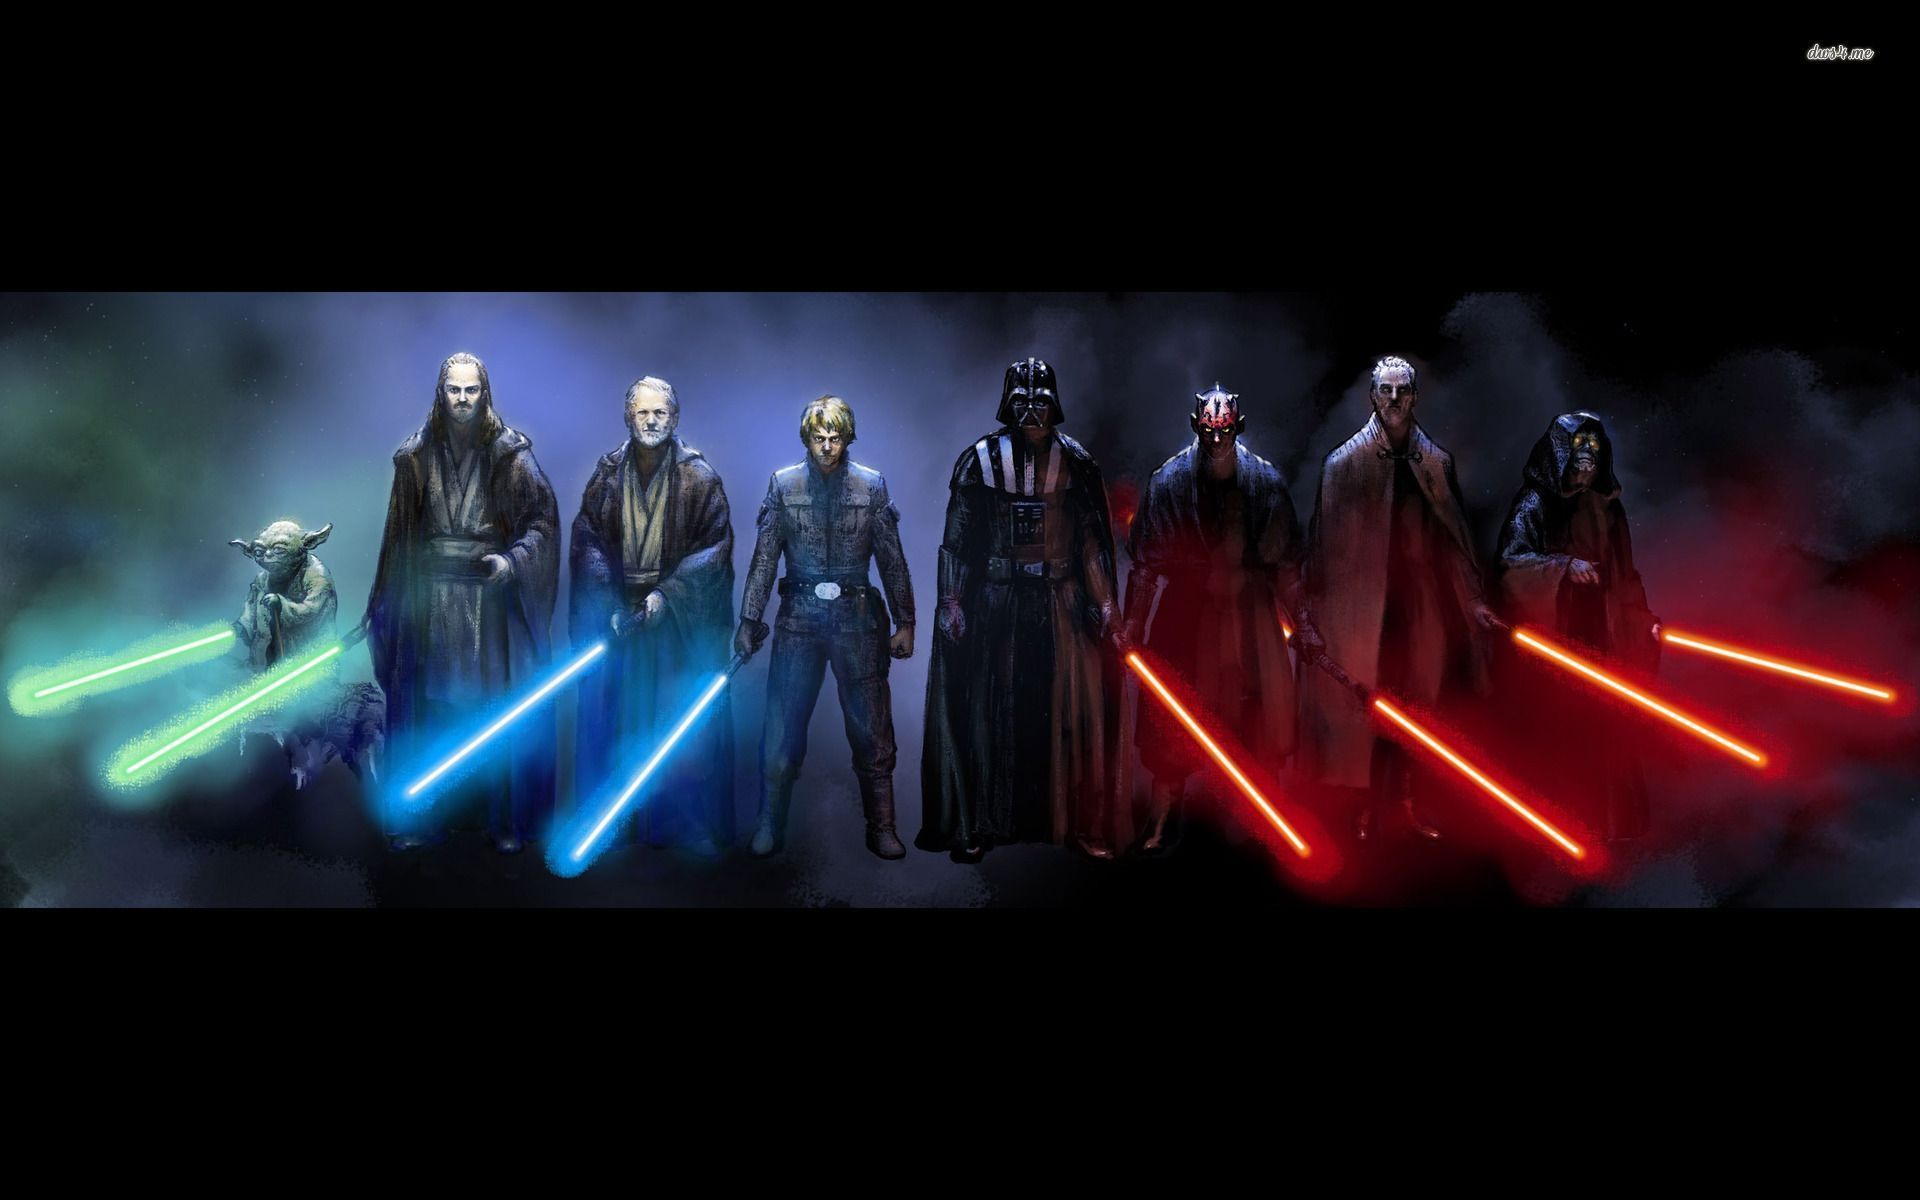 Jedi and Sith - Star Wars wallpaper - Movie wallpapers -